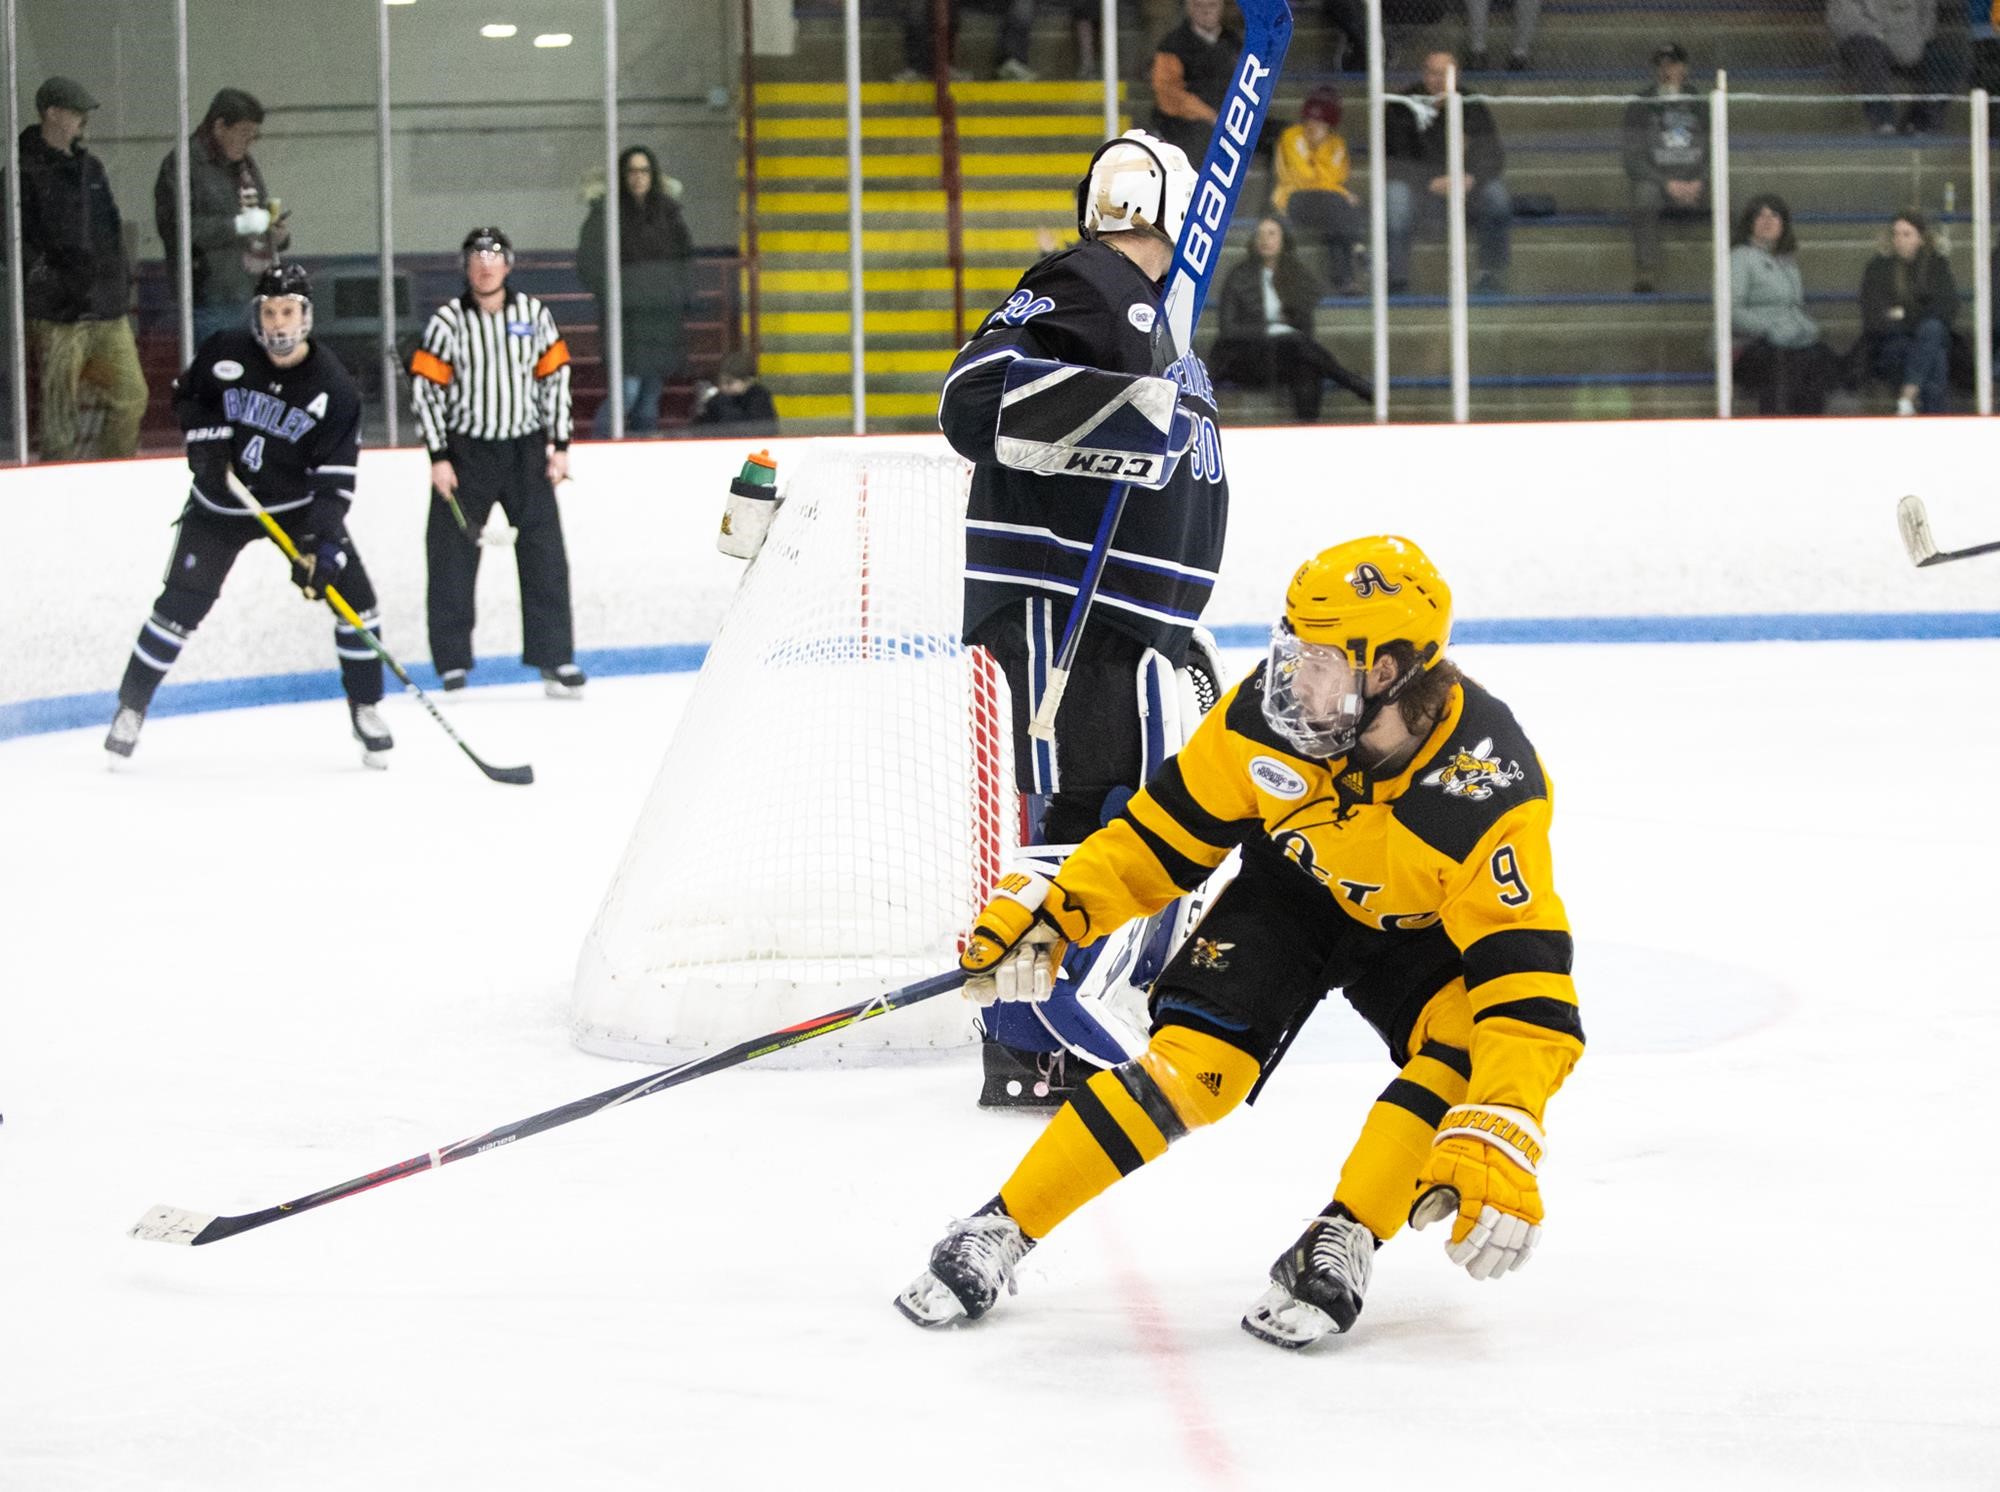 AIC Crashes Bentley, Punches Utica Ticket